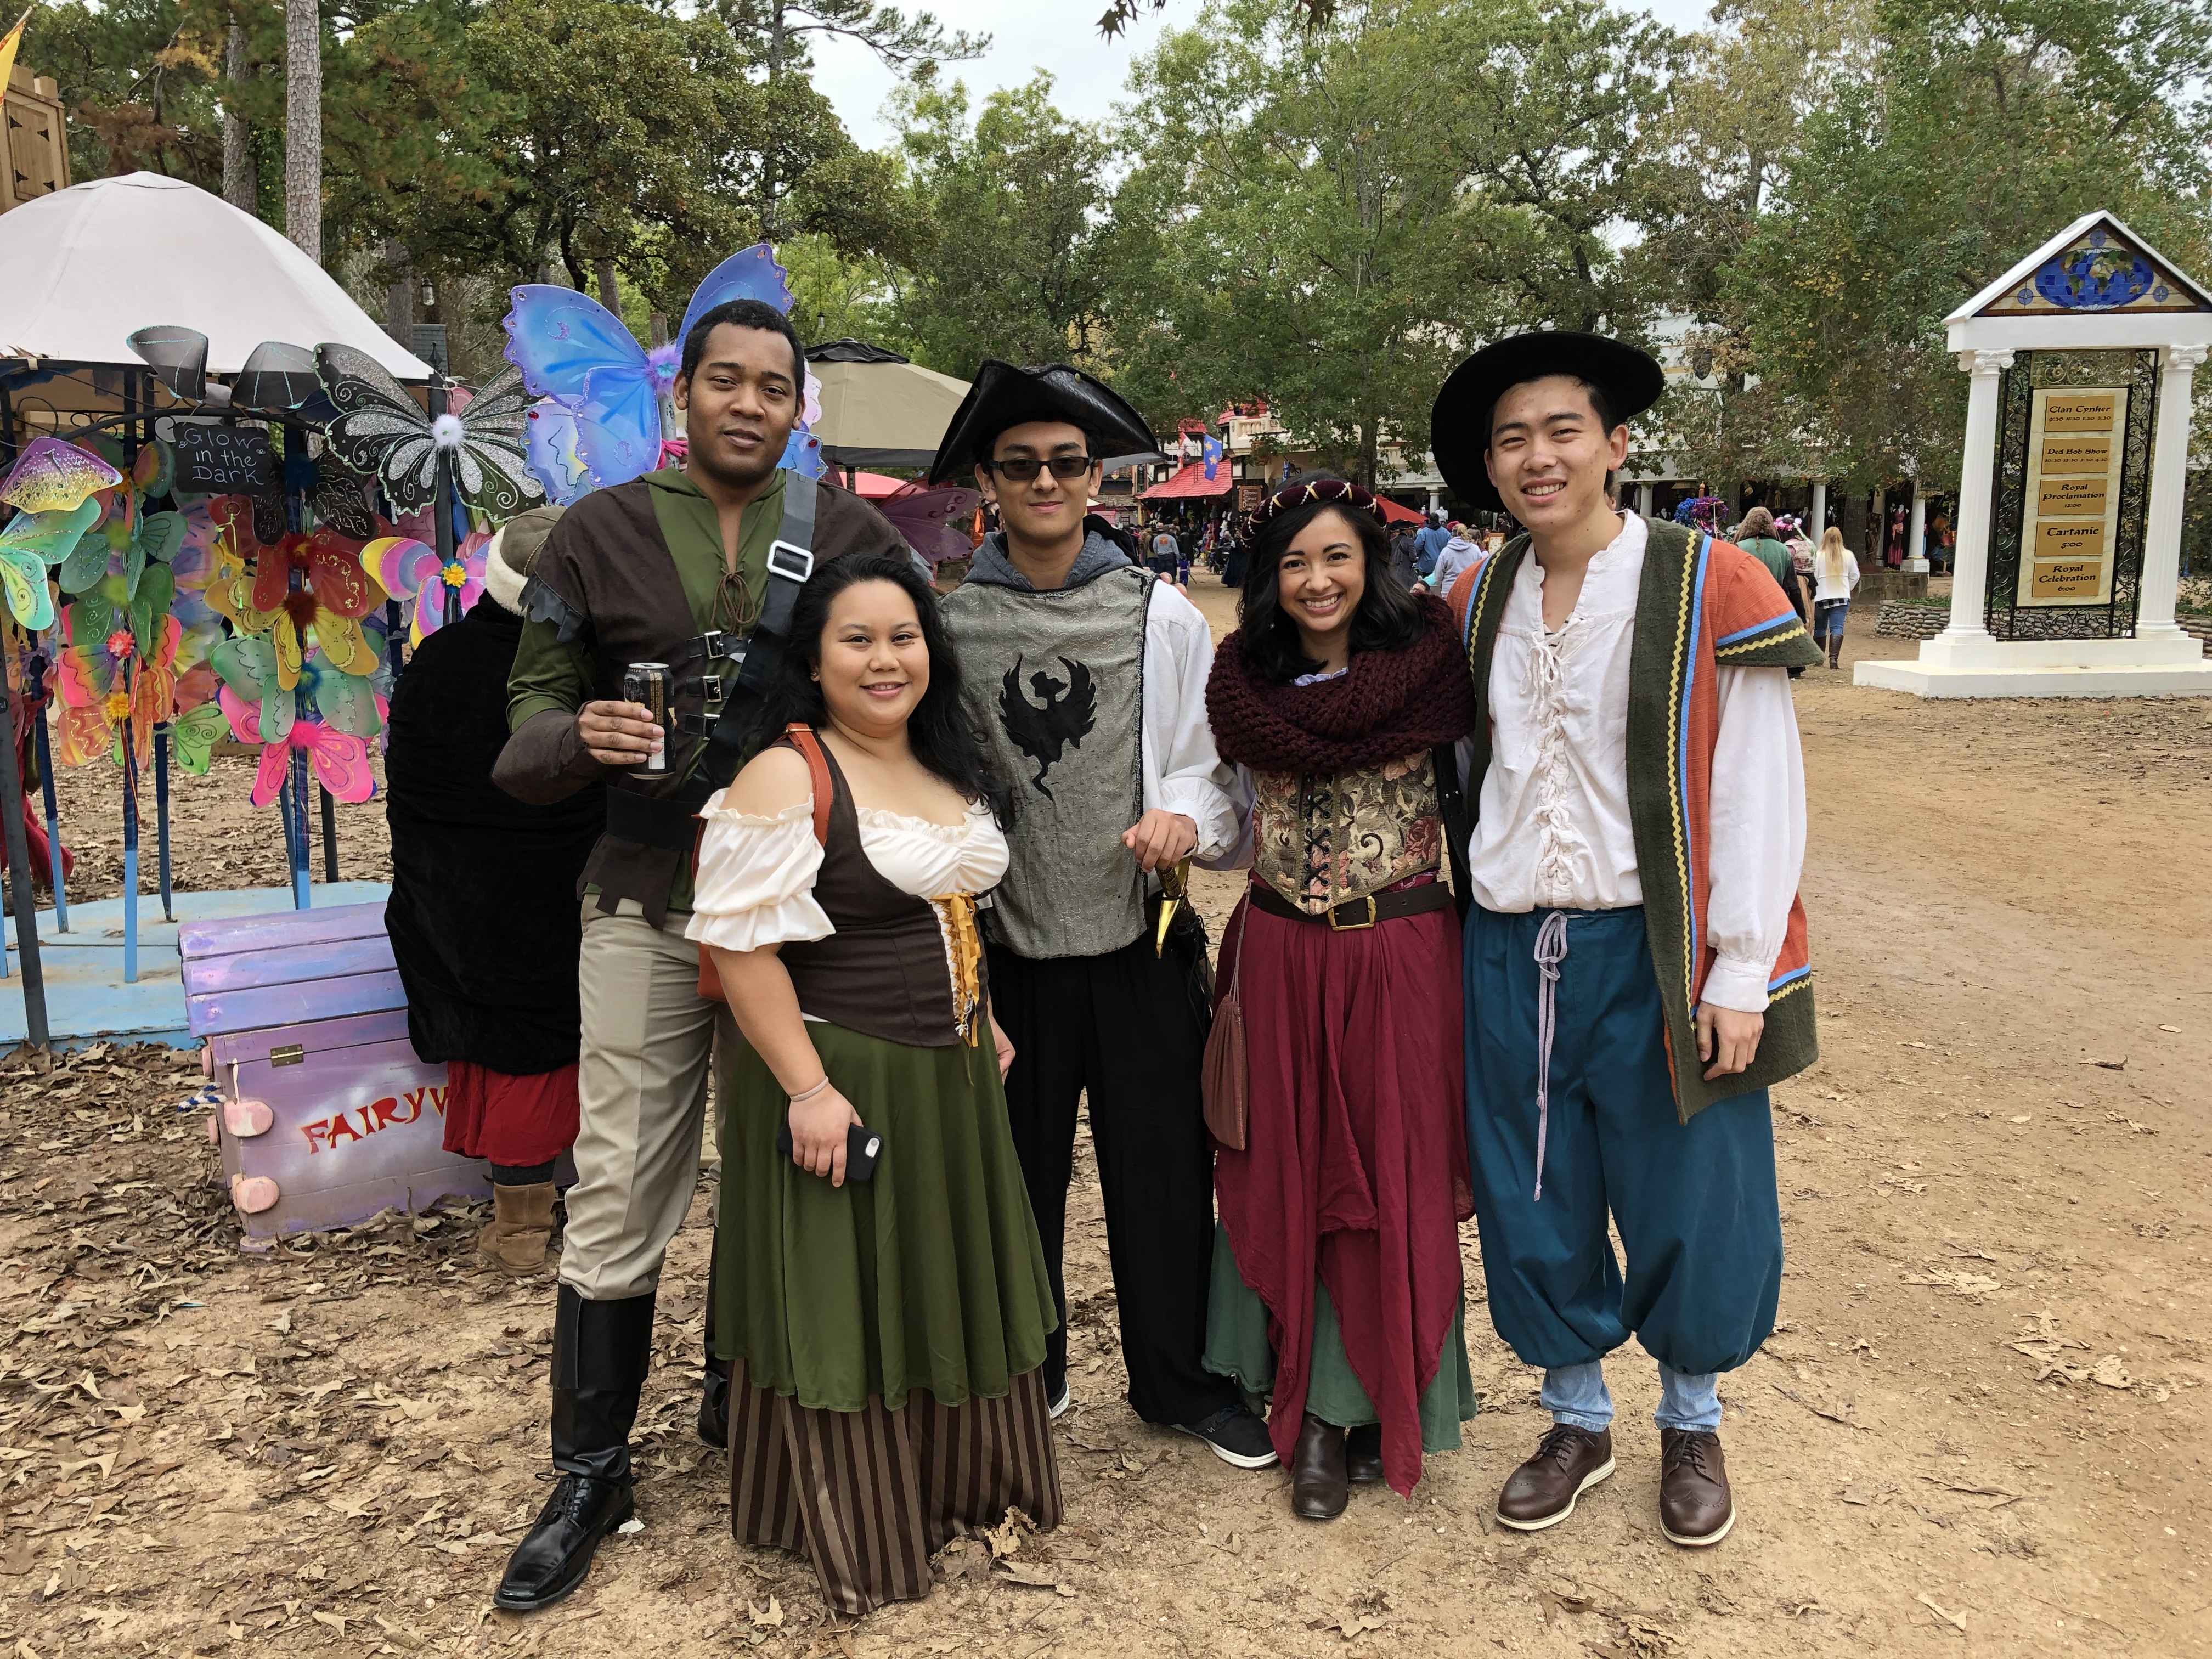 Non-Toxic Time Travel: Why The Texas Renaissance Festival Is Safer